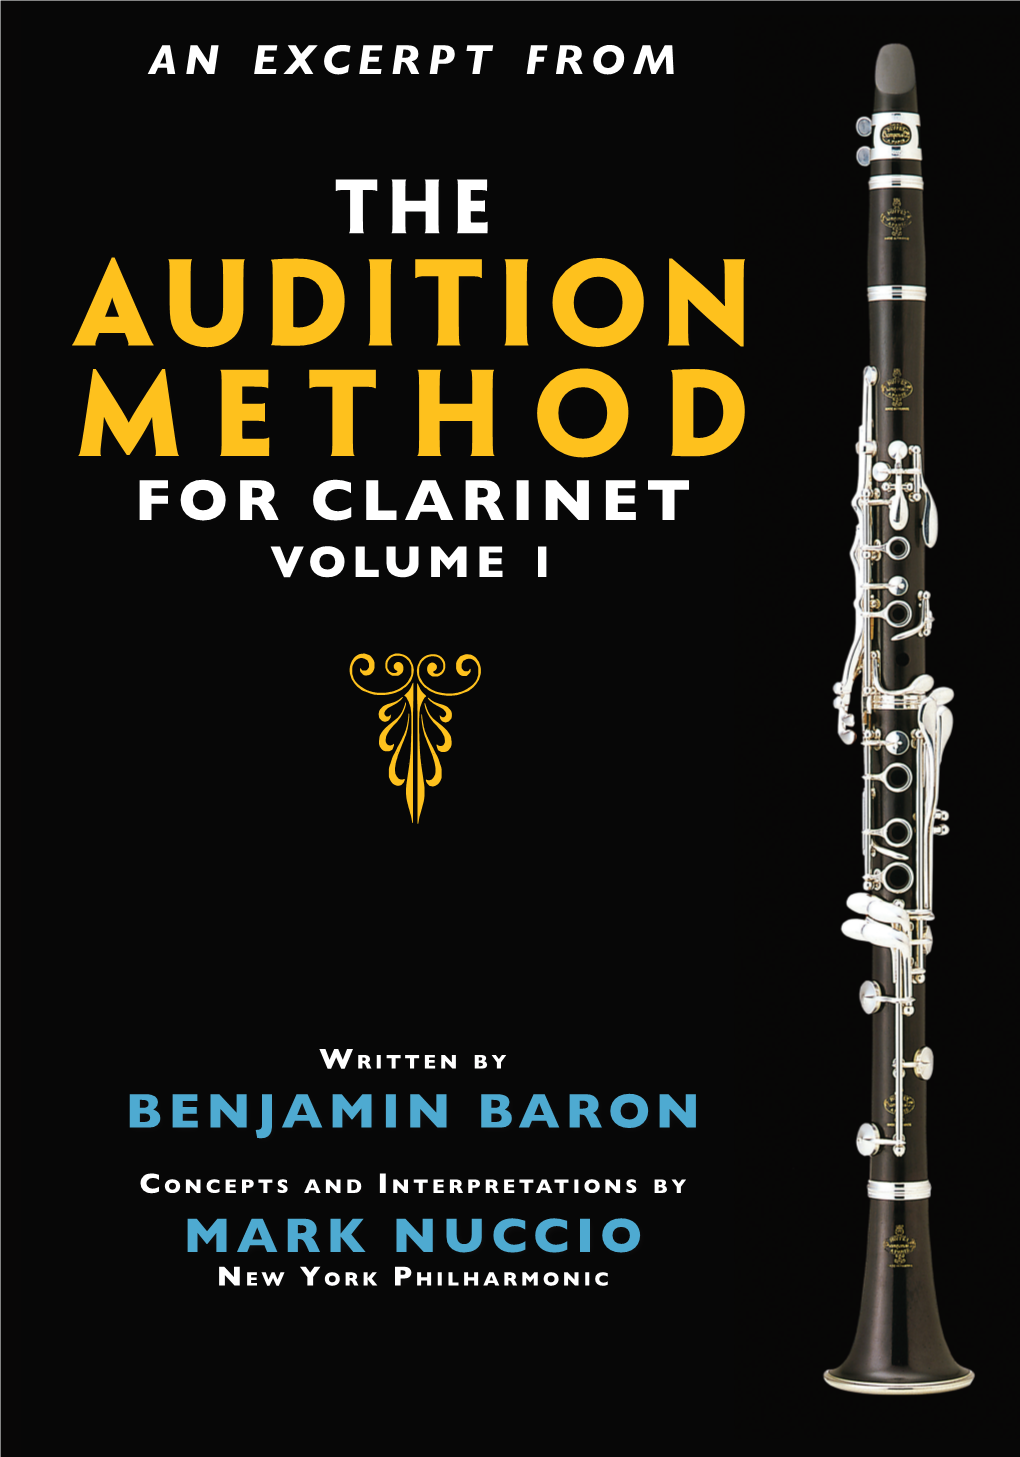 The Audition Method for Clarinet Sample